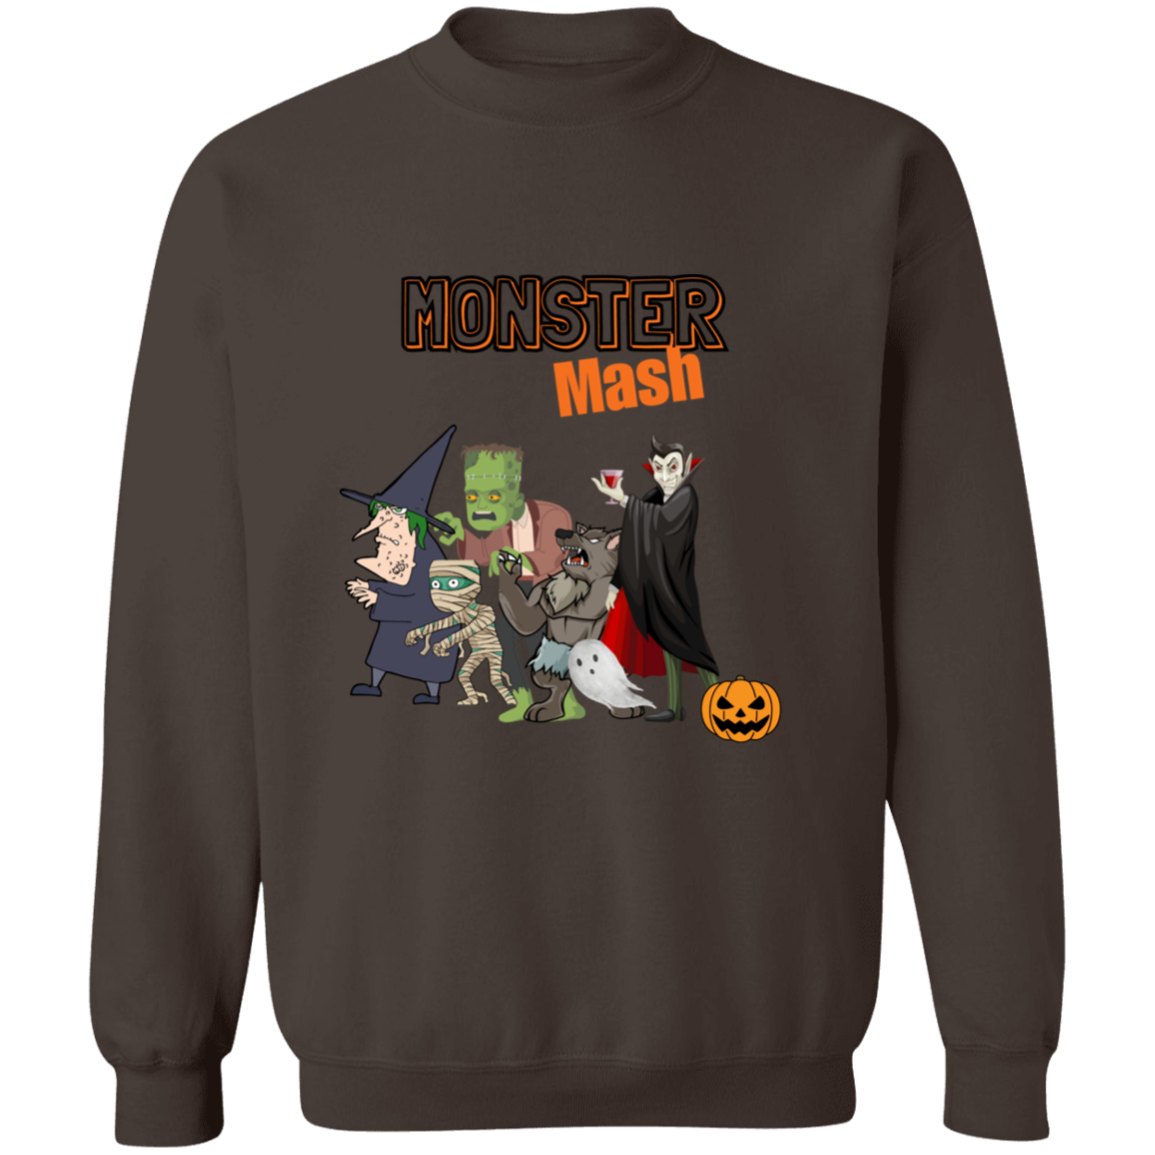 Get trendy with MONSTER Mash  Pullover Crewneck  Sweatshirt - Sweatshirts available at Good Gift Company. Grab yours for $39.95 today!